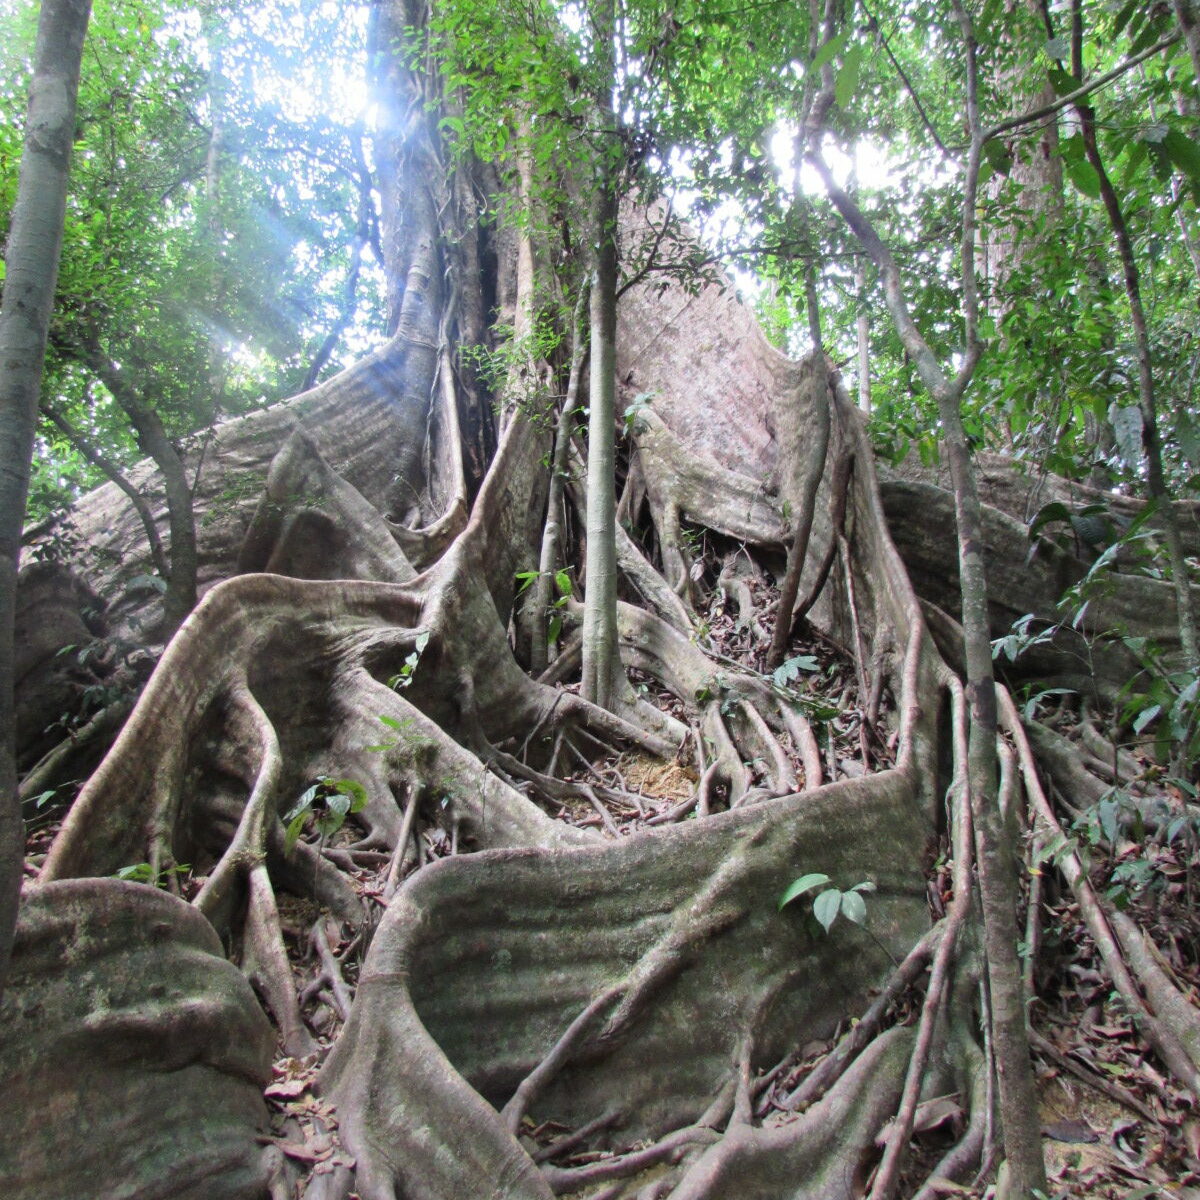 Big jungle tree Thailand with big roots and light shining through